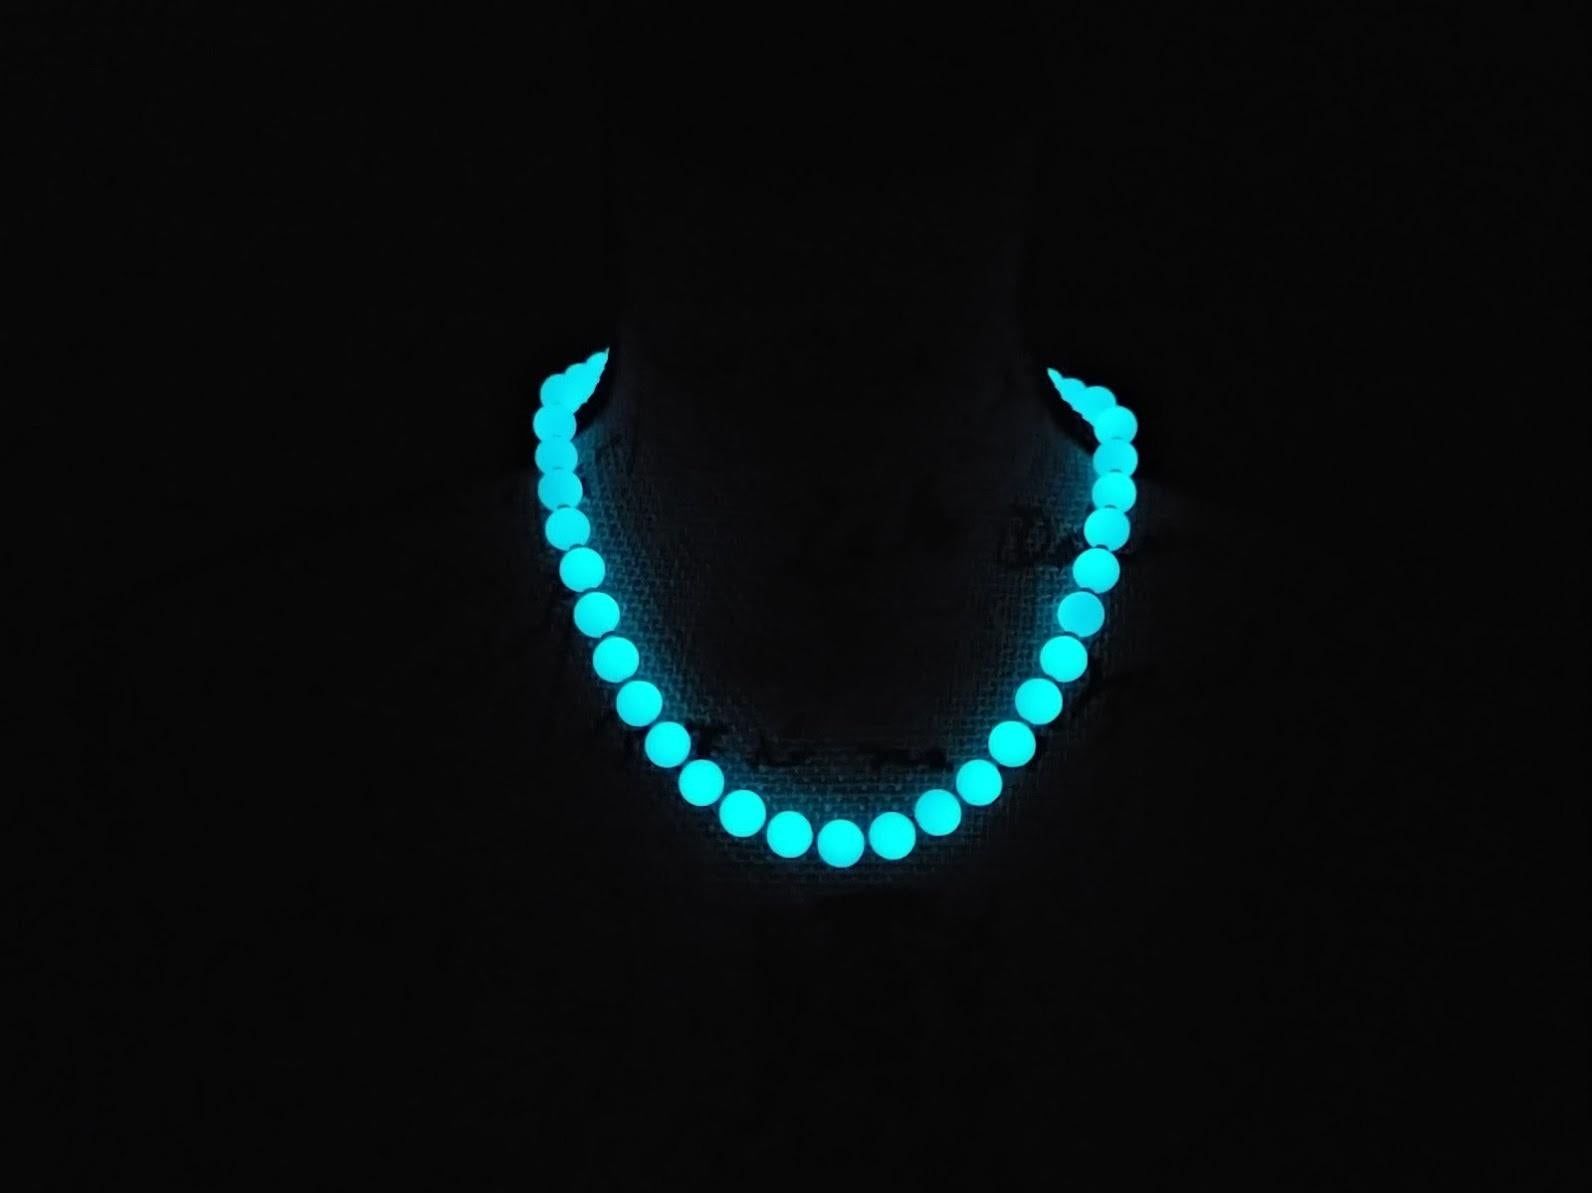 The length of the necklace is 17.5 inches (44.5 cm). The size of the smooth round beads is 10 mm. Beads are a light green color.
This is a naturally occurring glow-in-the-dark gemstone. Aragonite possesses natural phosphorescence, causing it to emit